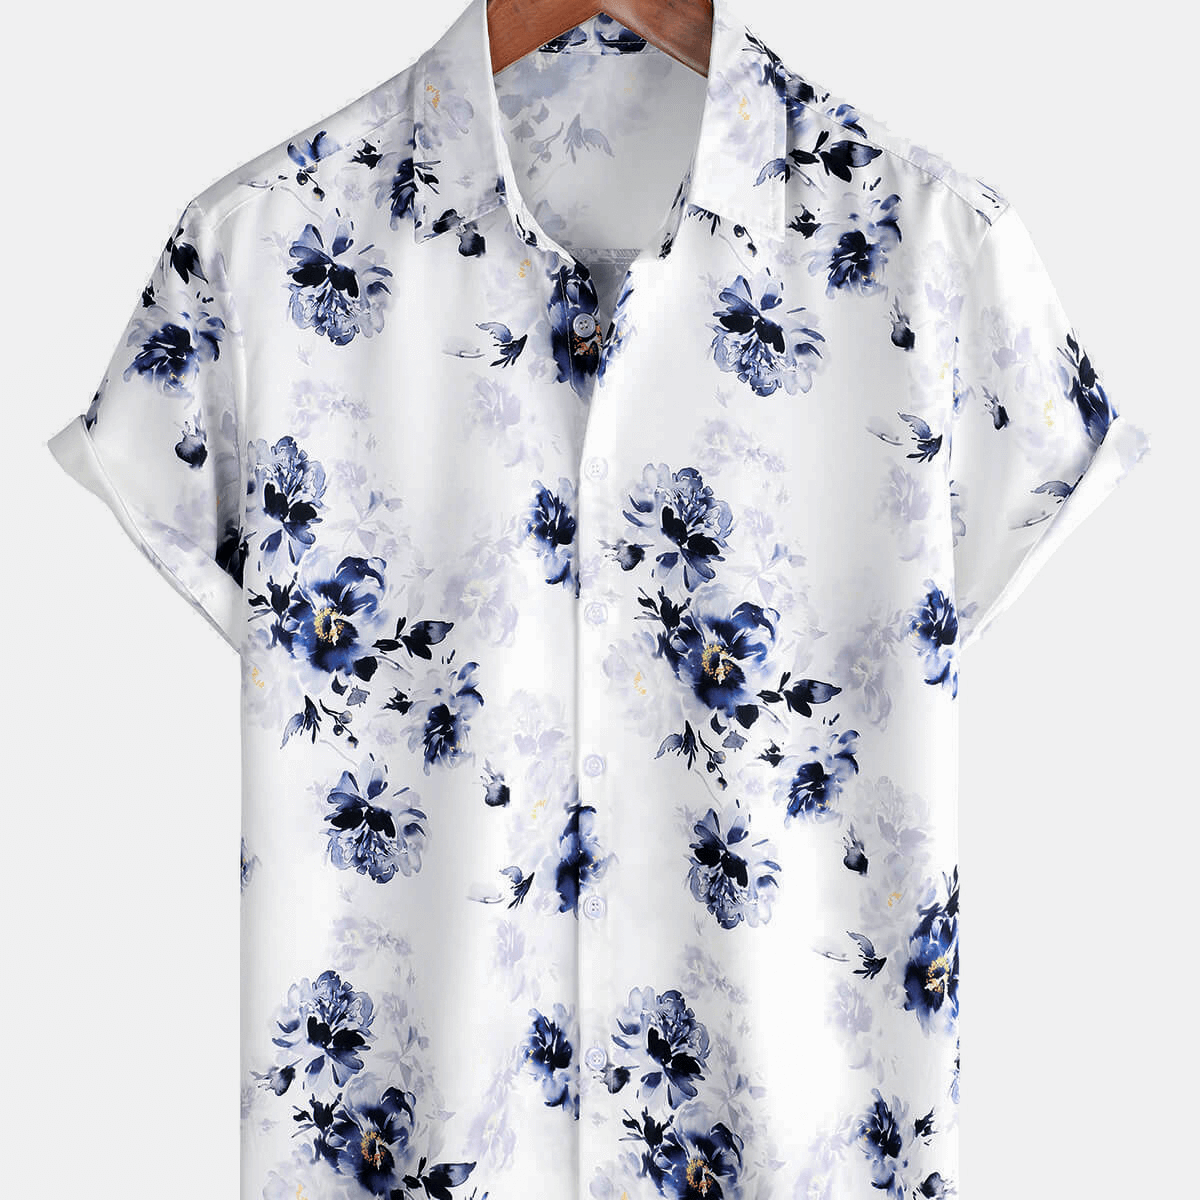 Men's Casual Vintage Floral Short Sleeve White Holiday Hawaiian Button Up Shirt